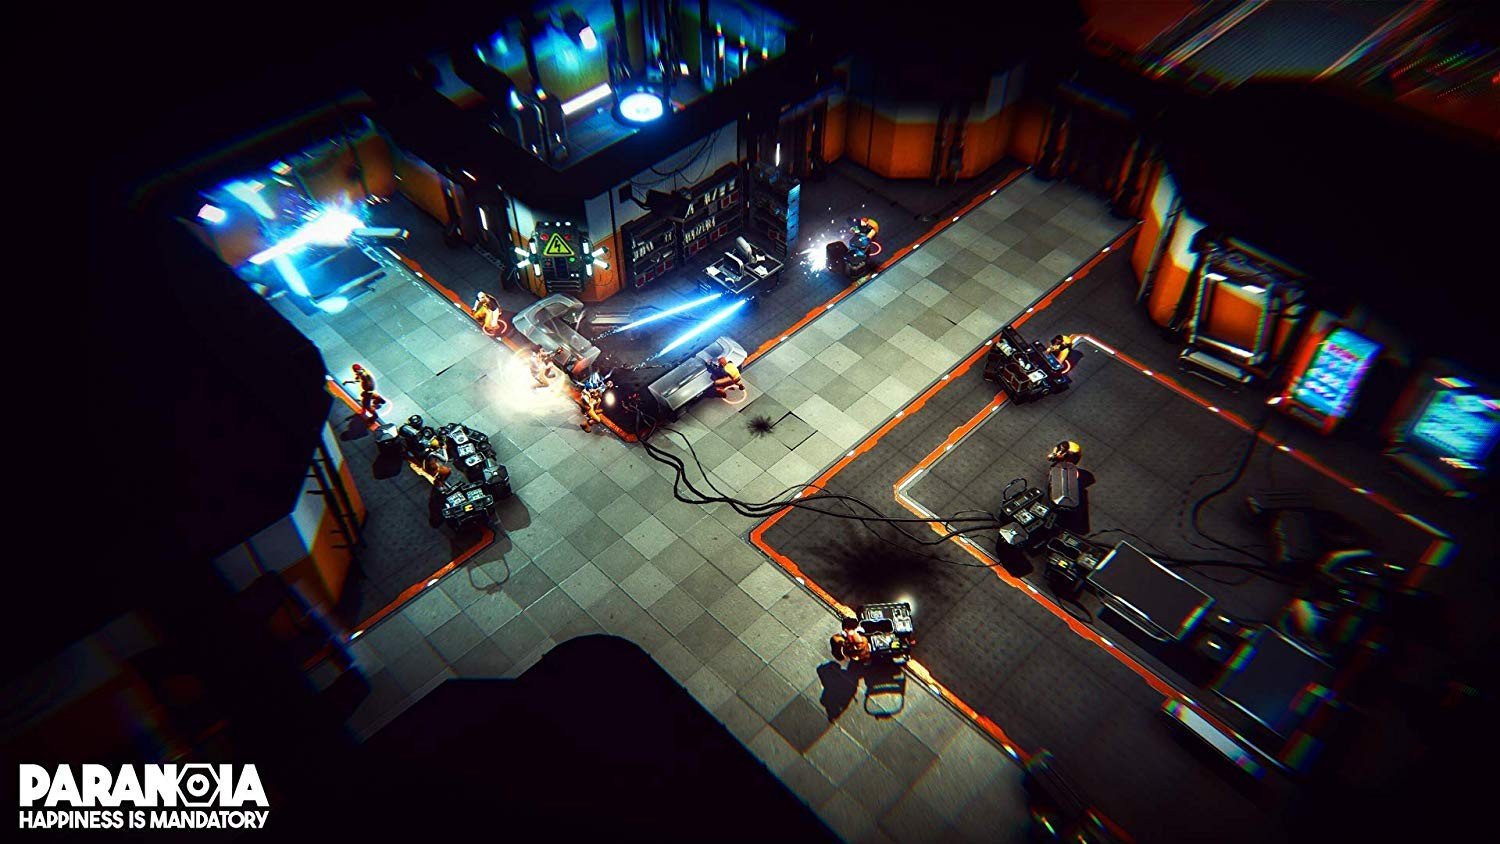 Paranoia: Happiness is Mandatory,ps4, playstation 4, xone,xbox one,us, north america, europe,release date, gameplay, features, price,pre-order, multi-language, bigben interactive, cyanide studio, black shamrock